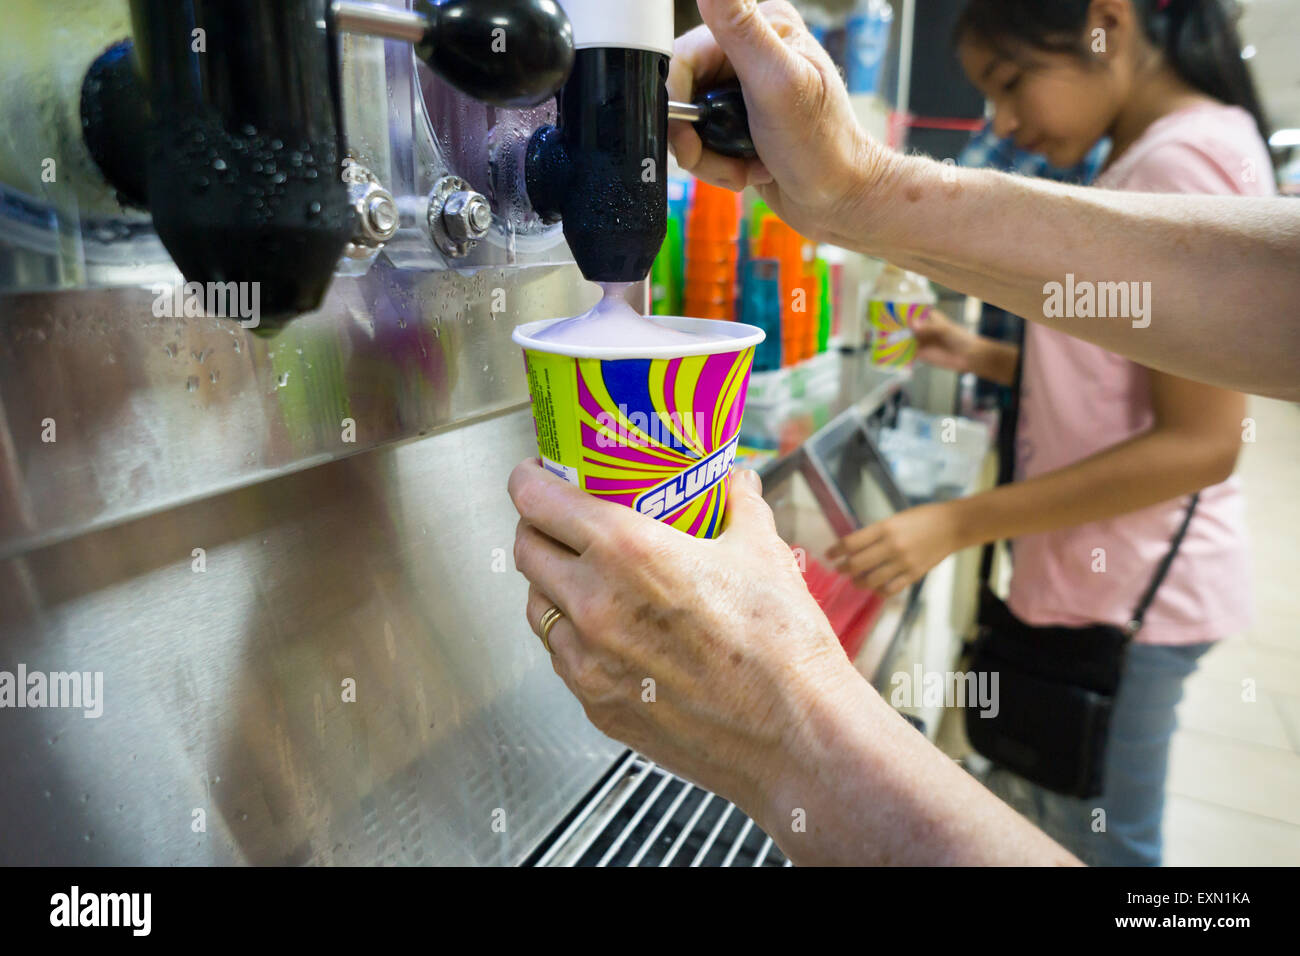 Slurpee lovers take advantage of Free Slurpee Day at a 7-Eleven store in New York on Saturday, July 11, 2015 (7-11, get it?). The 7-Eleven self-proclaimed Free Slurpee Day has been a yearly event for the past 13 years giving away free 7oz Slurpees. The popular icy, slushy, syrupy drinks are available in regular and diet flavors, in combinations, and the stores have stocked up with extra barrels of syrup to meet the expected demand. The 88 year old chain expects to serve over 8 million Slurpees today. (© Richard B. Levine) Stock Photo